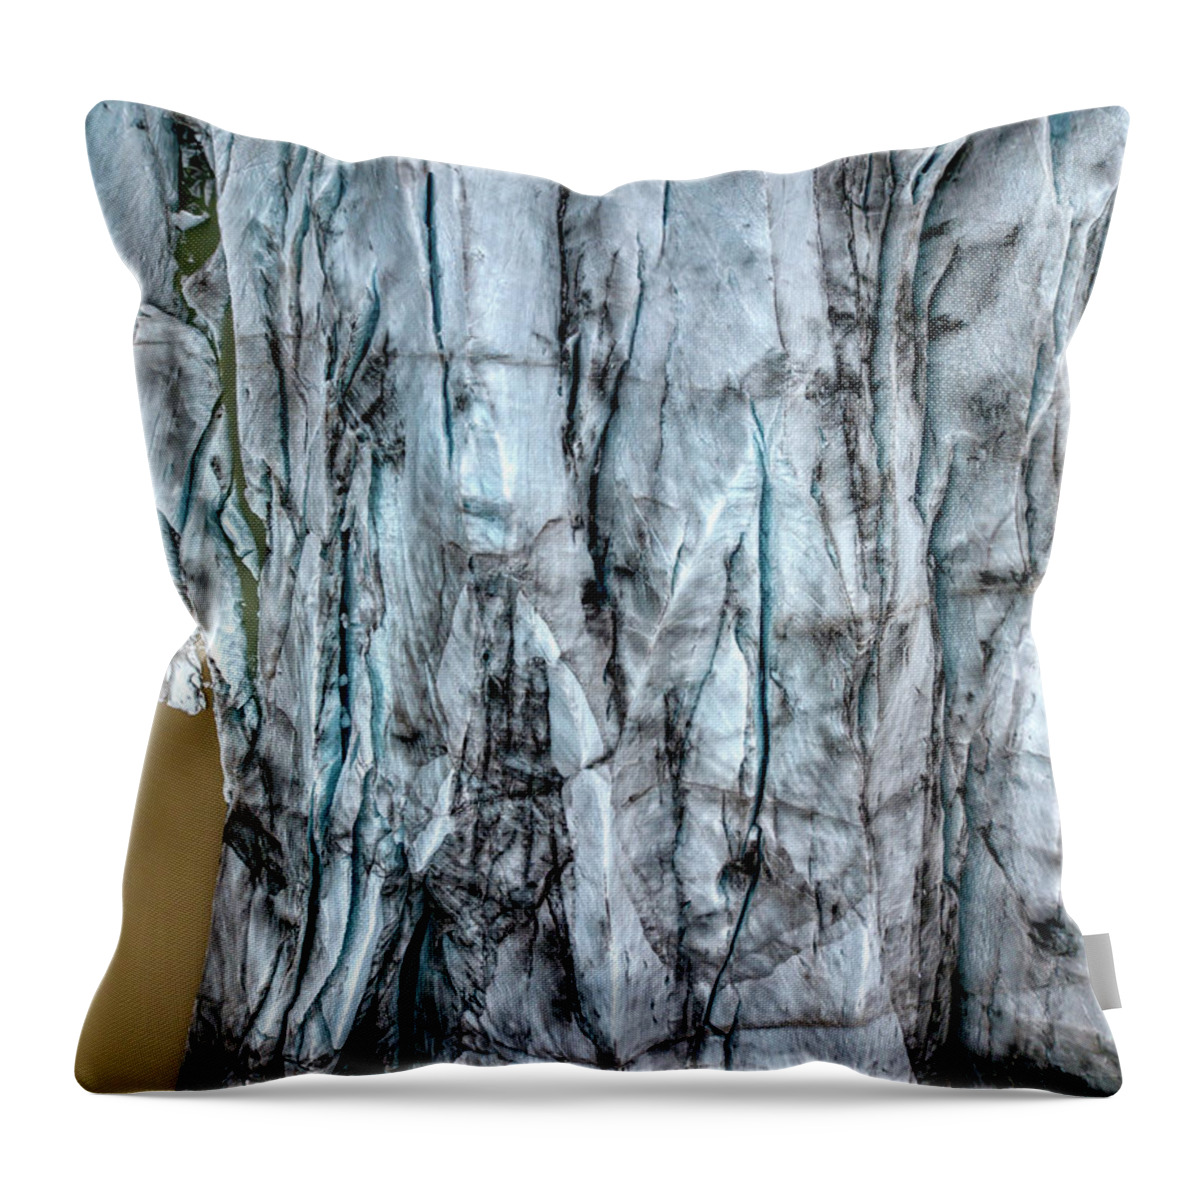 Drone Throw Pillow featuring the photograph Artic Glacier by David Letts